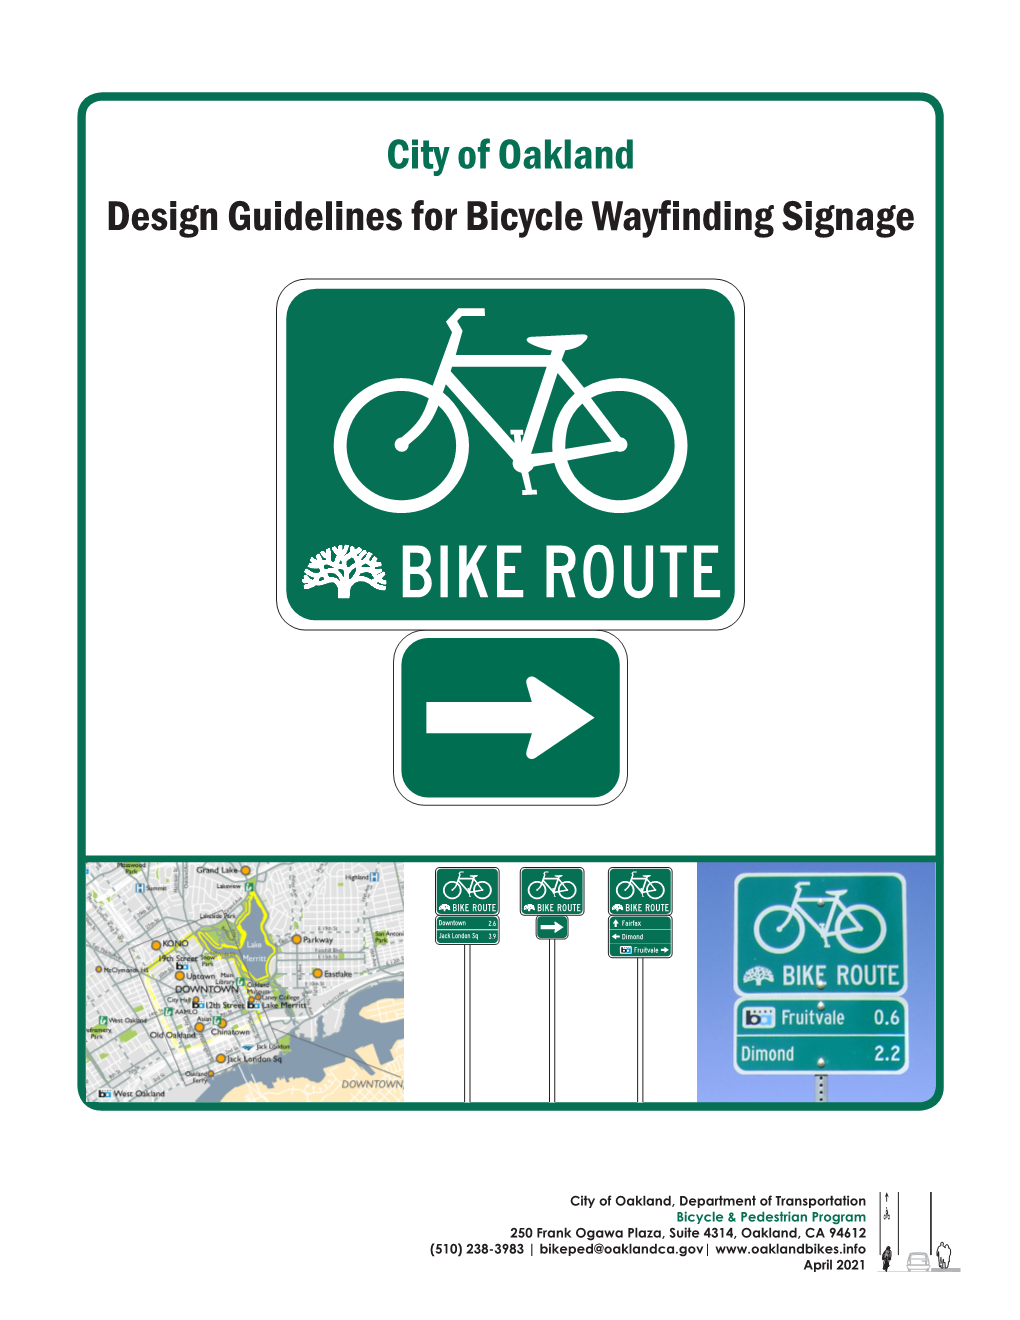 City of Oakland Design Guidelines for Bicycle Wayfinding Signage